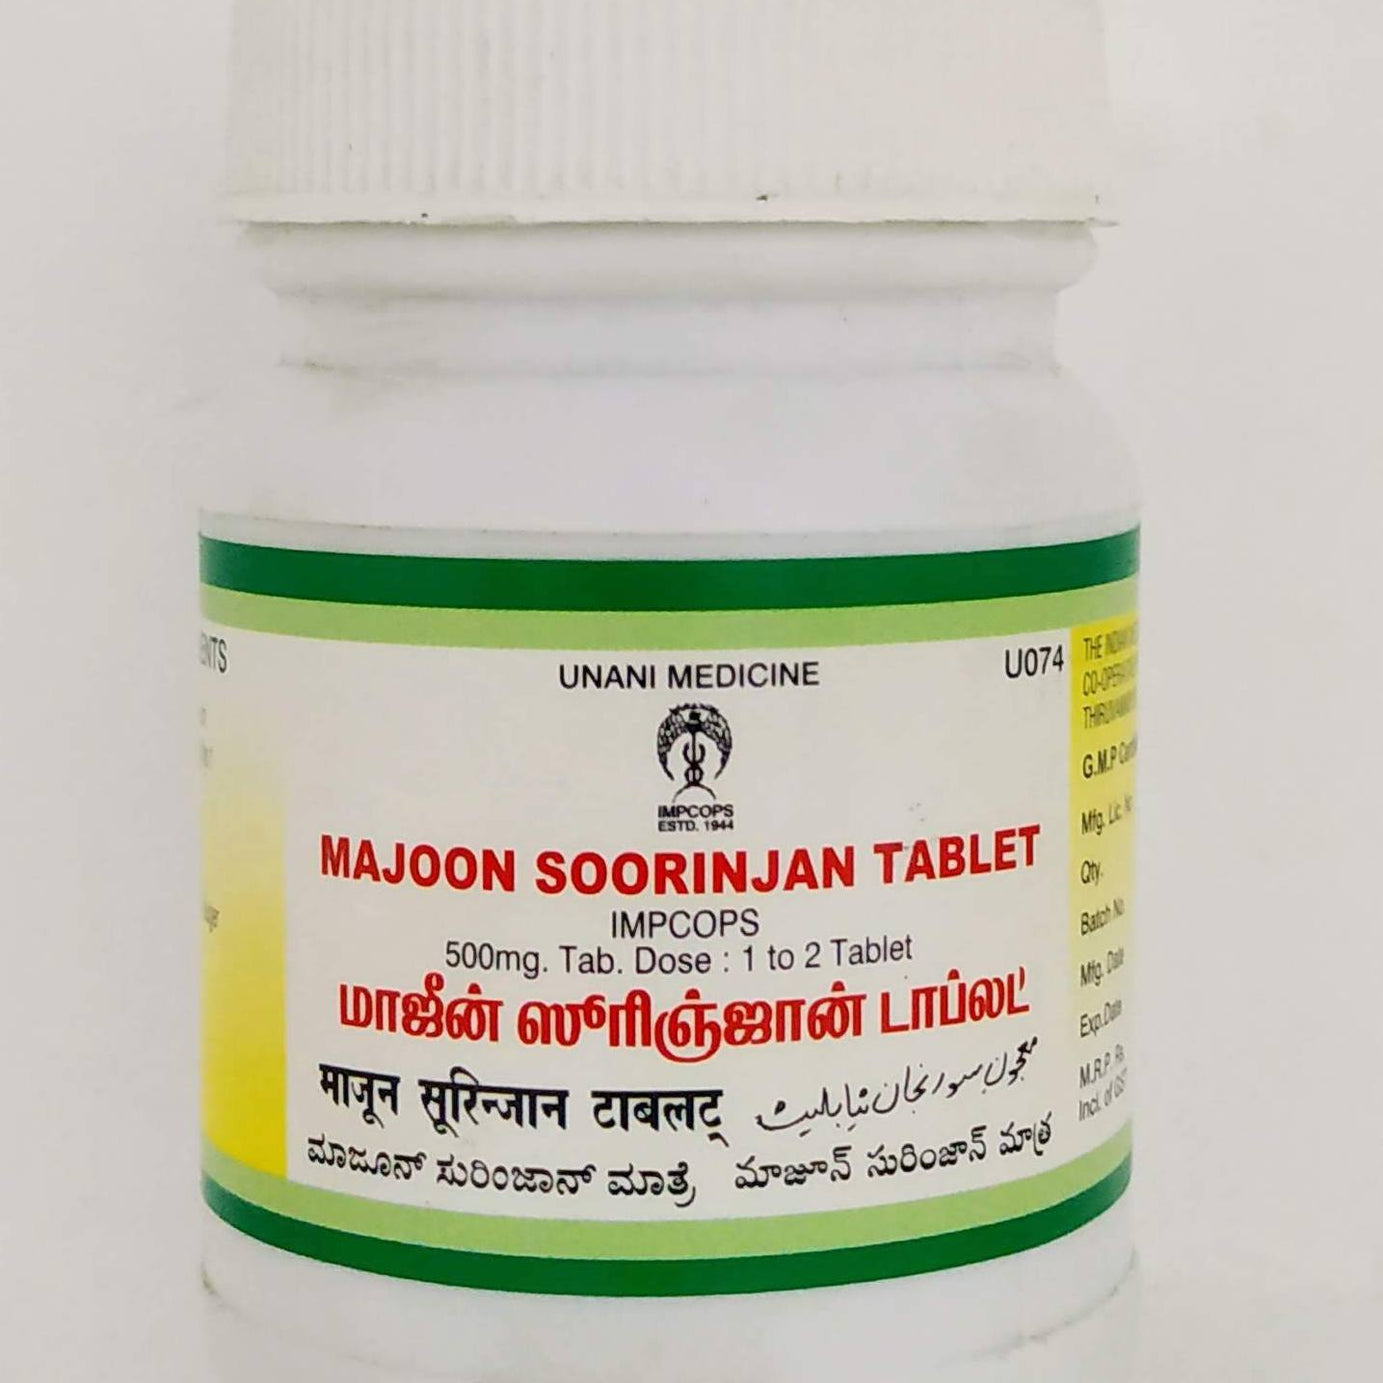 Shop Majoon Soorinjan Tablets - 100Tablets at price 141.00 from Impcops Online - Ayush Care